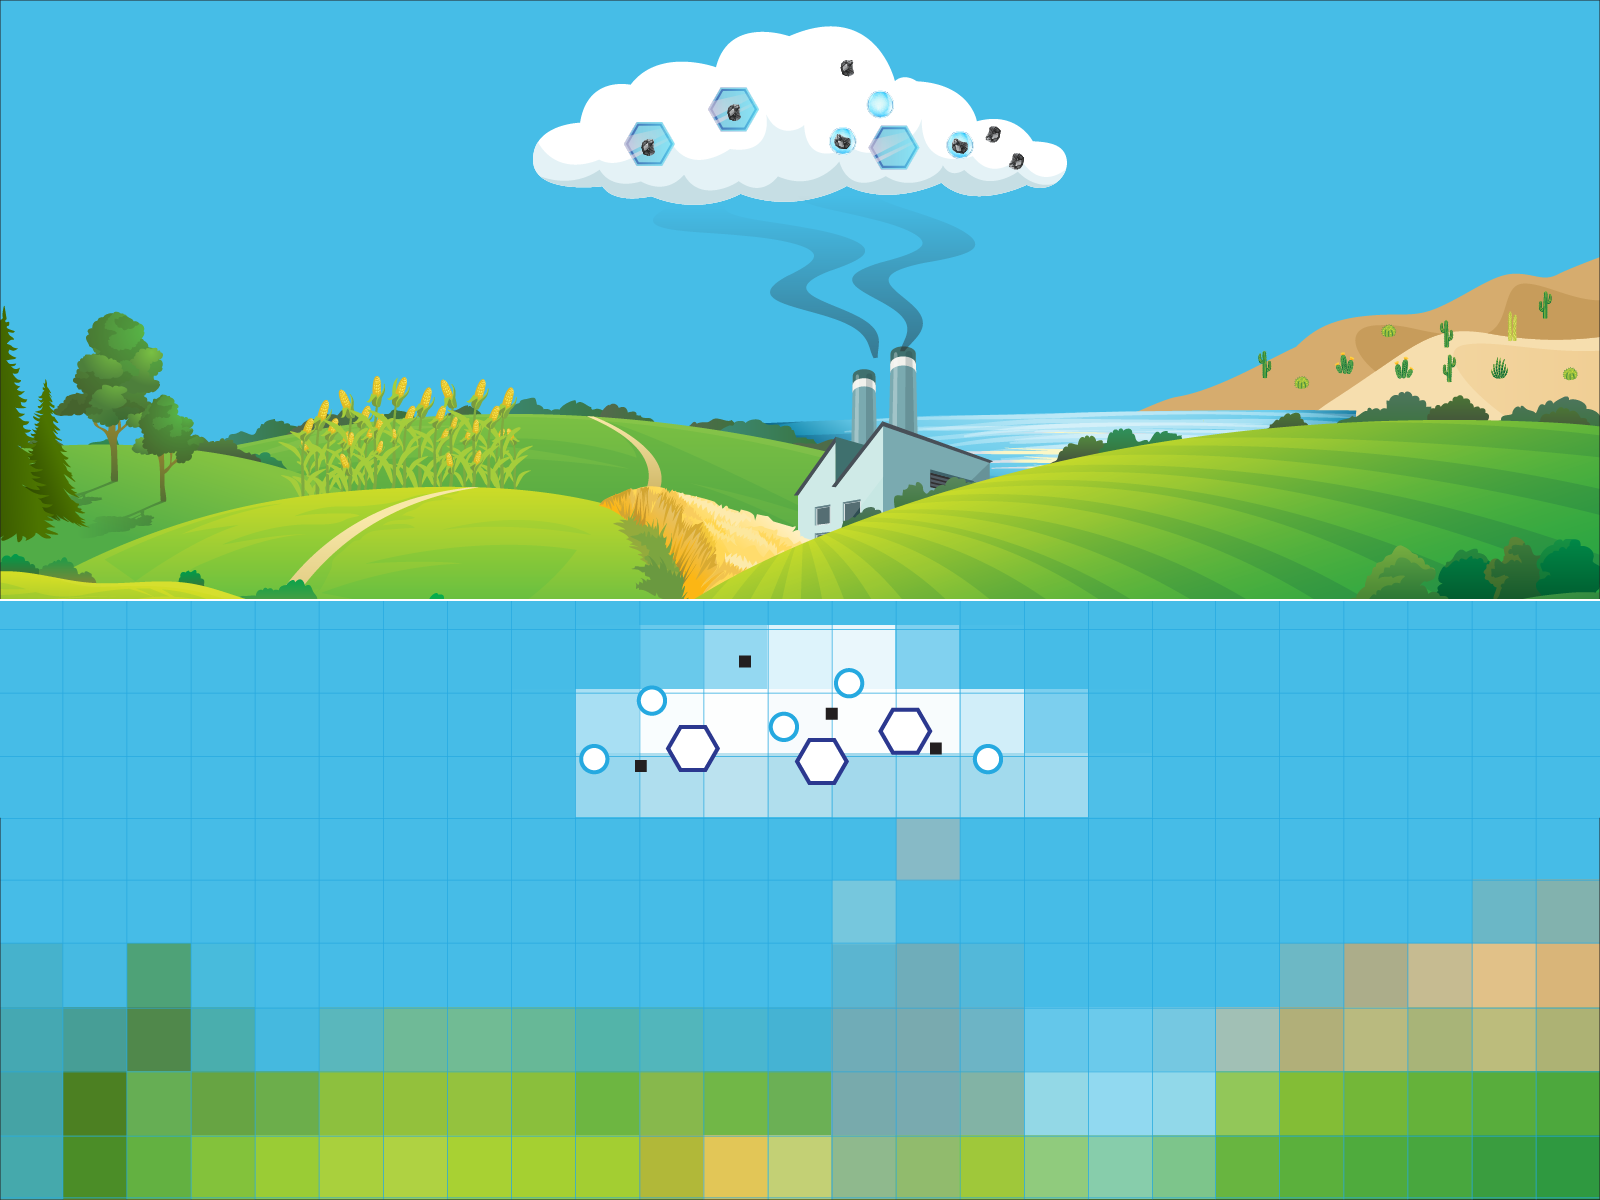 Illustration showing detailed, real-world view of the world above a pixelated, modeled version of the same image